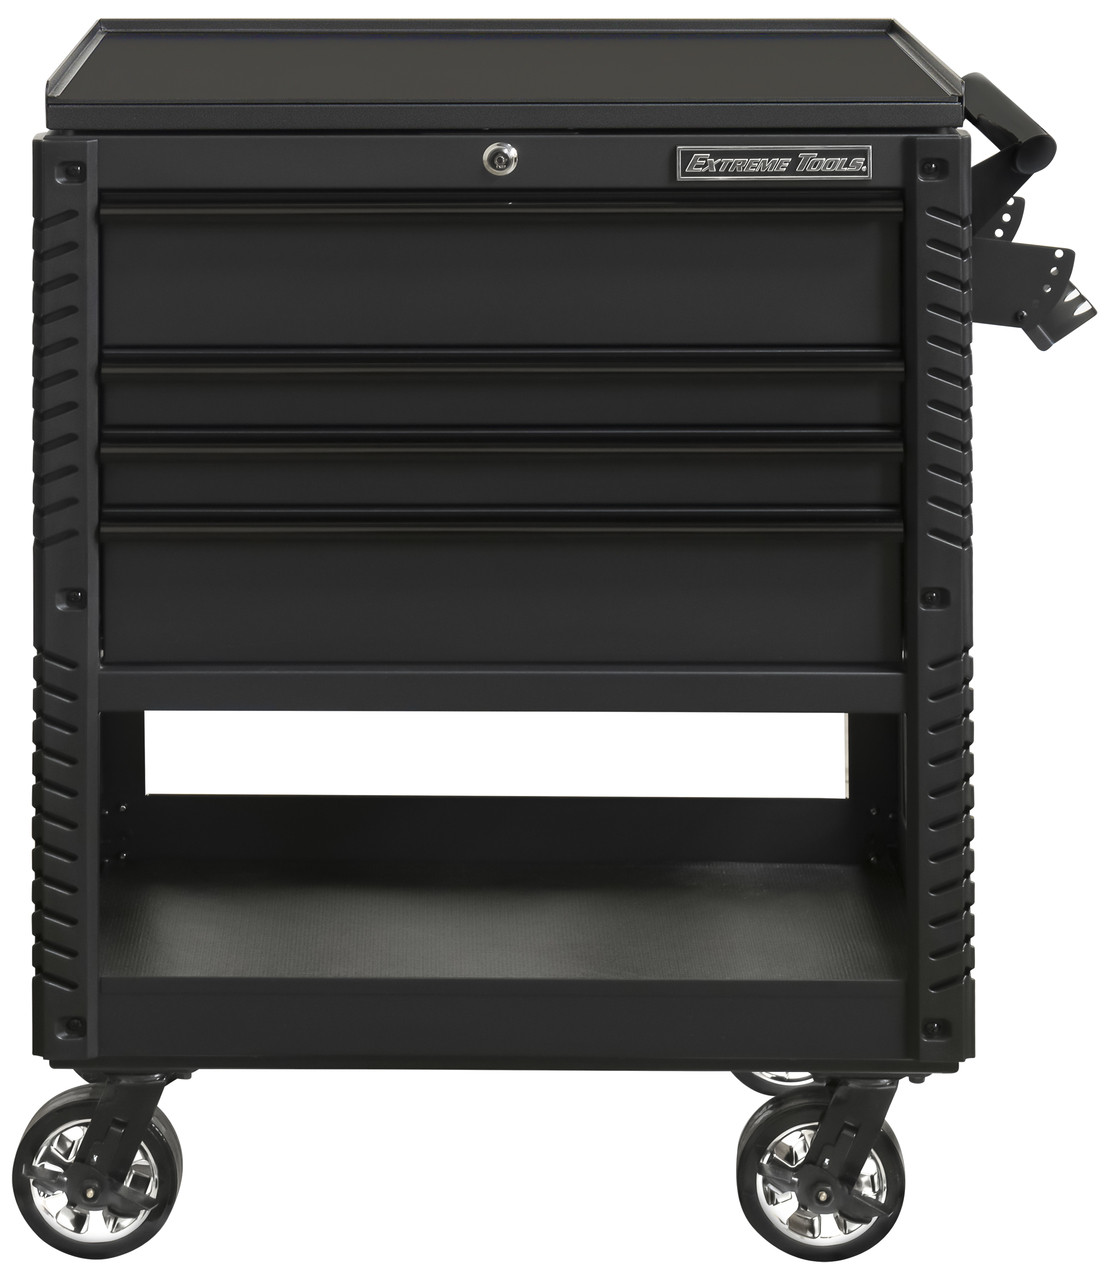 Extreme Tools EX3304TCMBBK 33" 4 Drawer Deluxe Series Tool Cart - Matt Black with Black Drawer Pulls